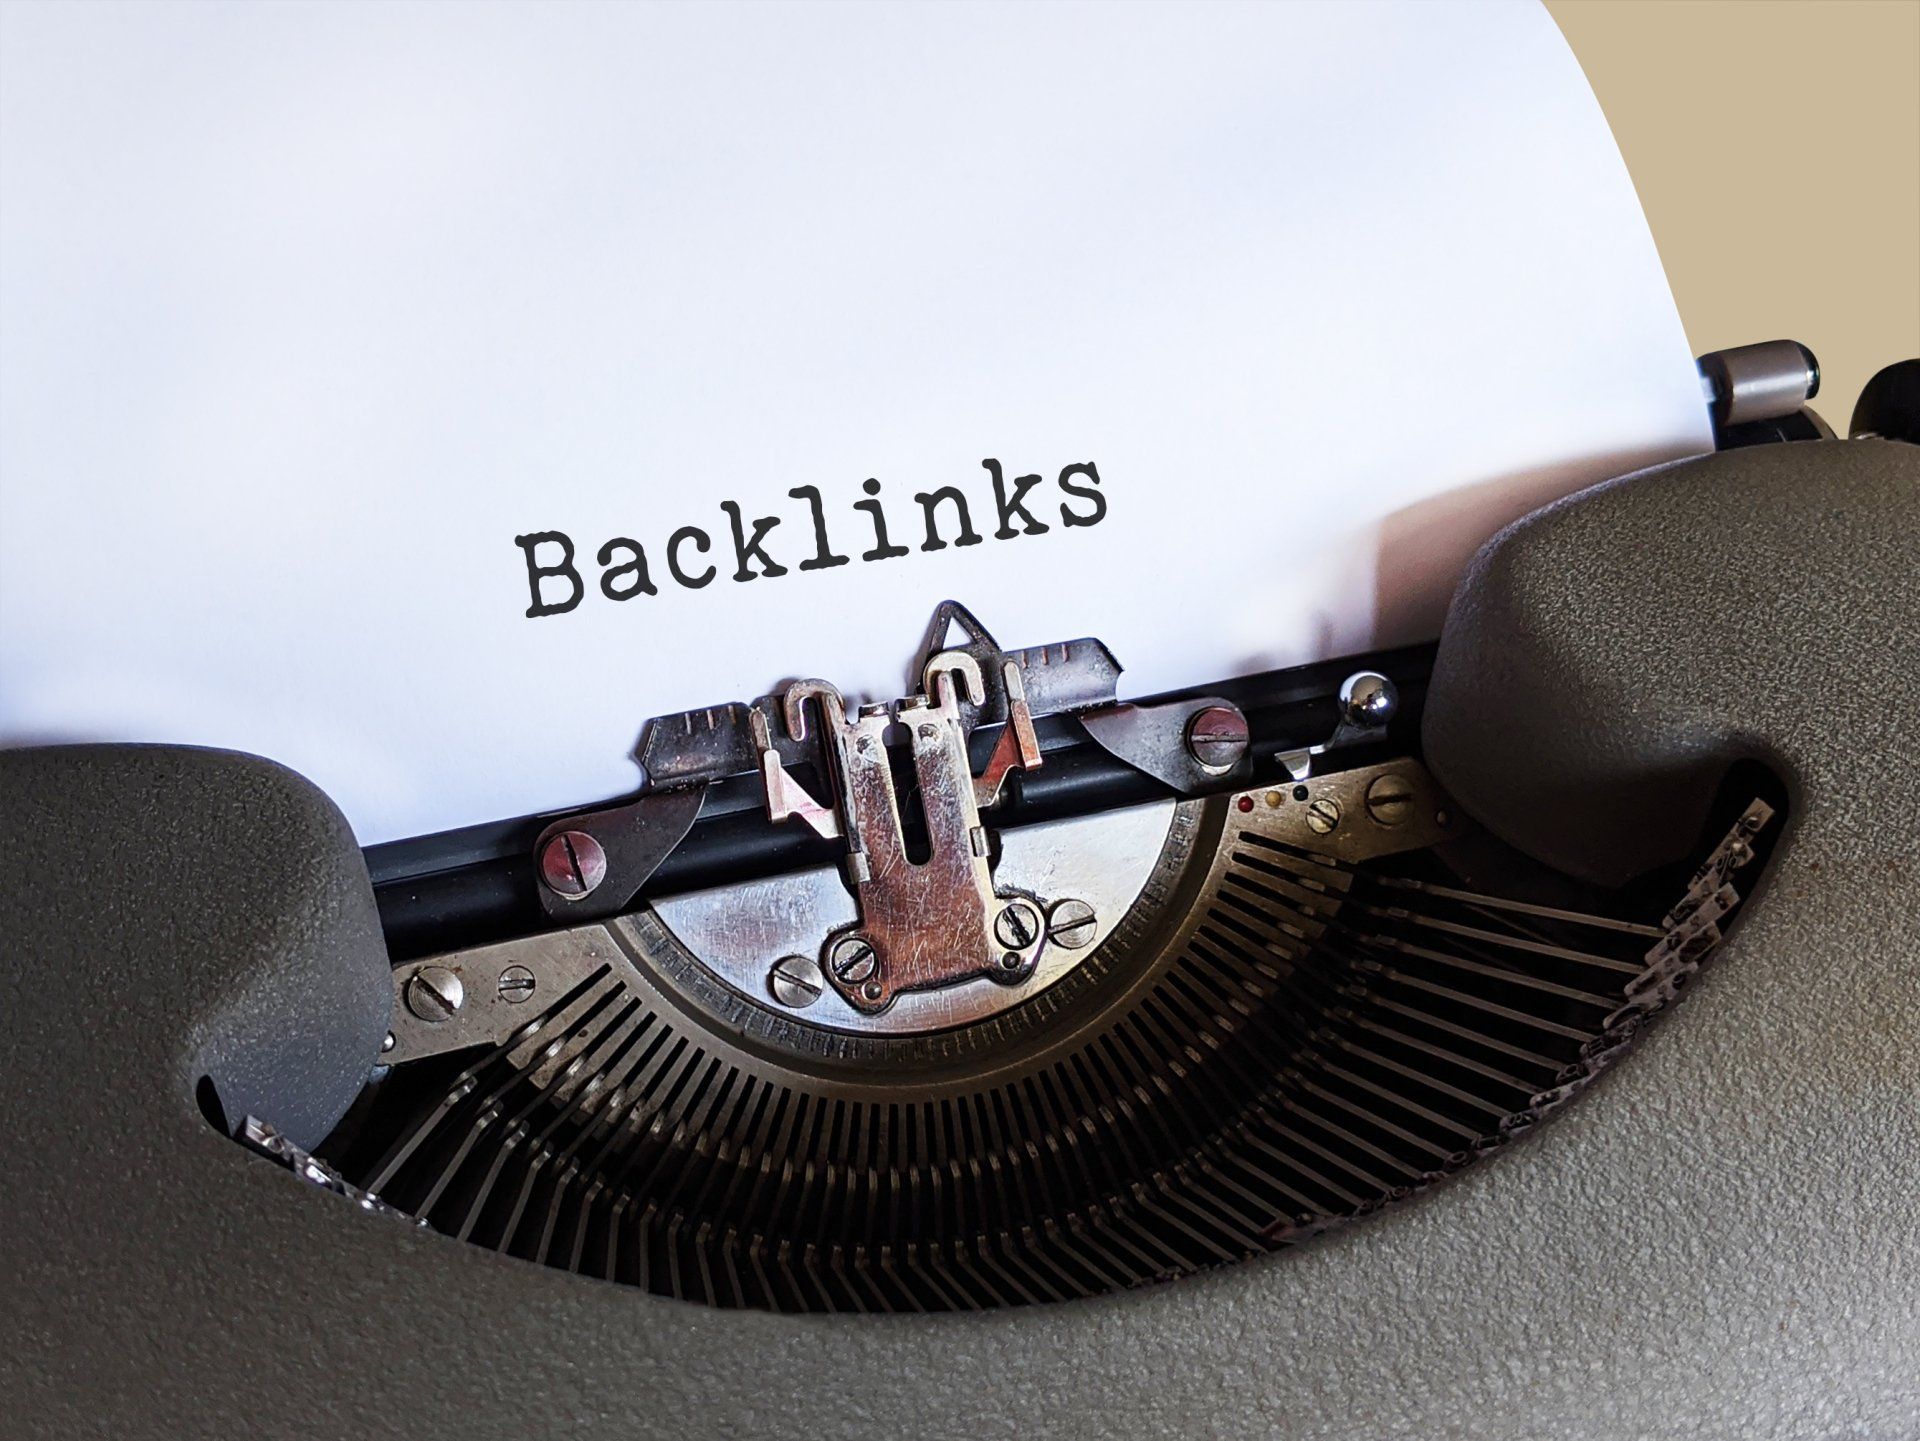 Website owners need to build high-quality backlinks from relevant and authoritative websites